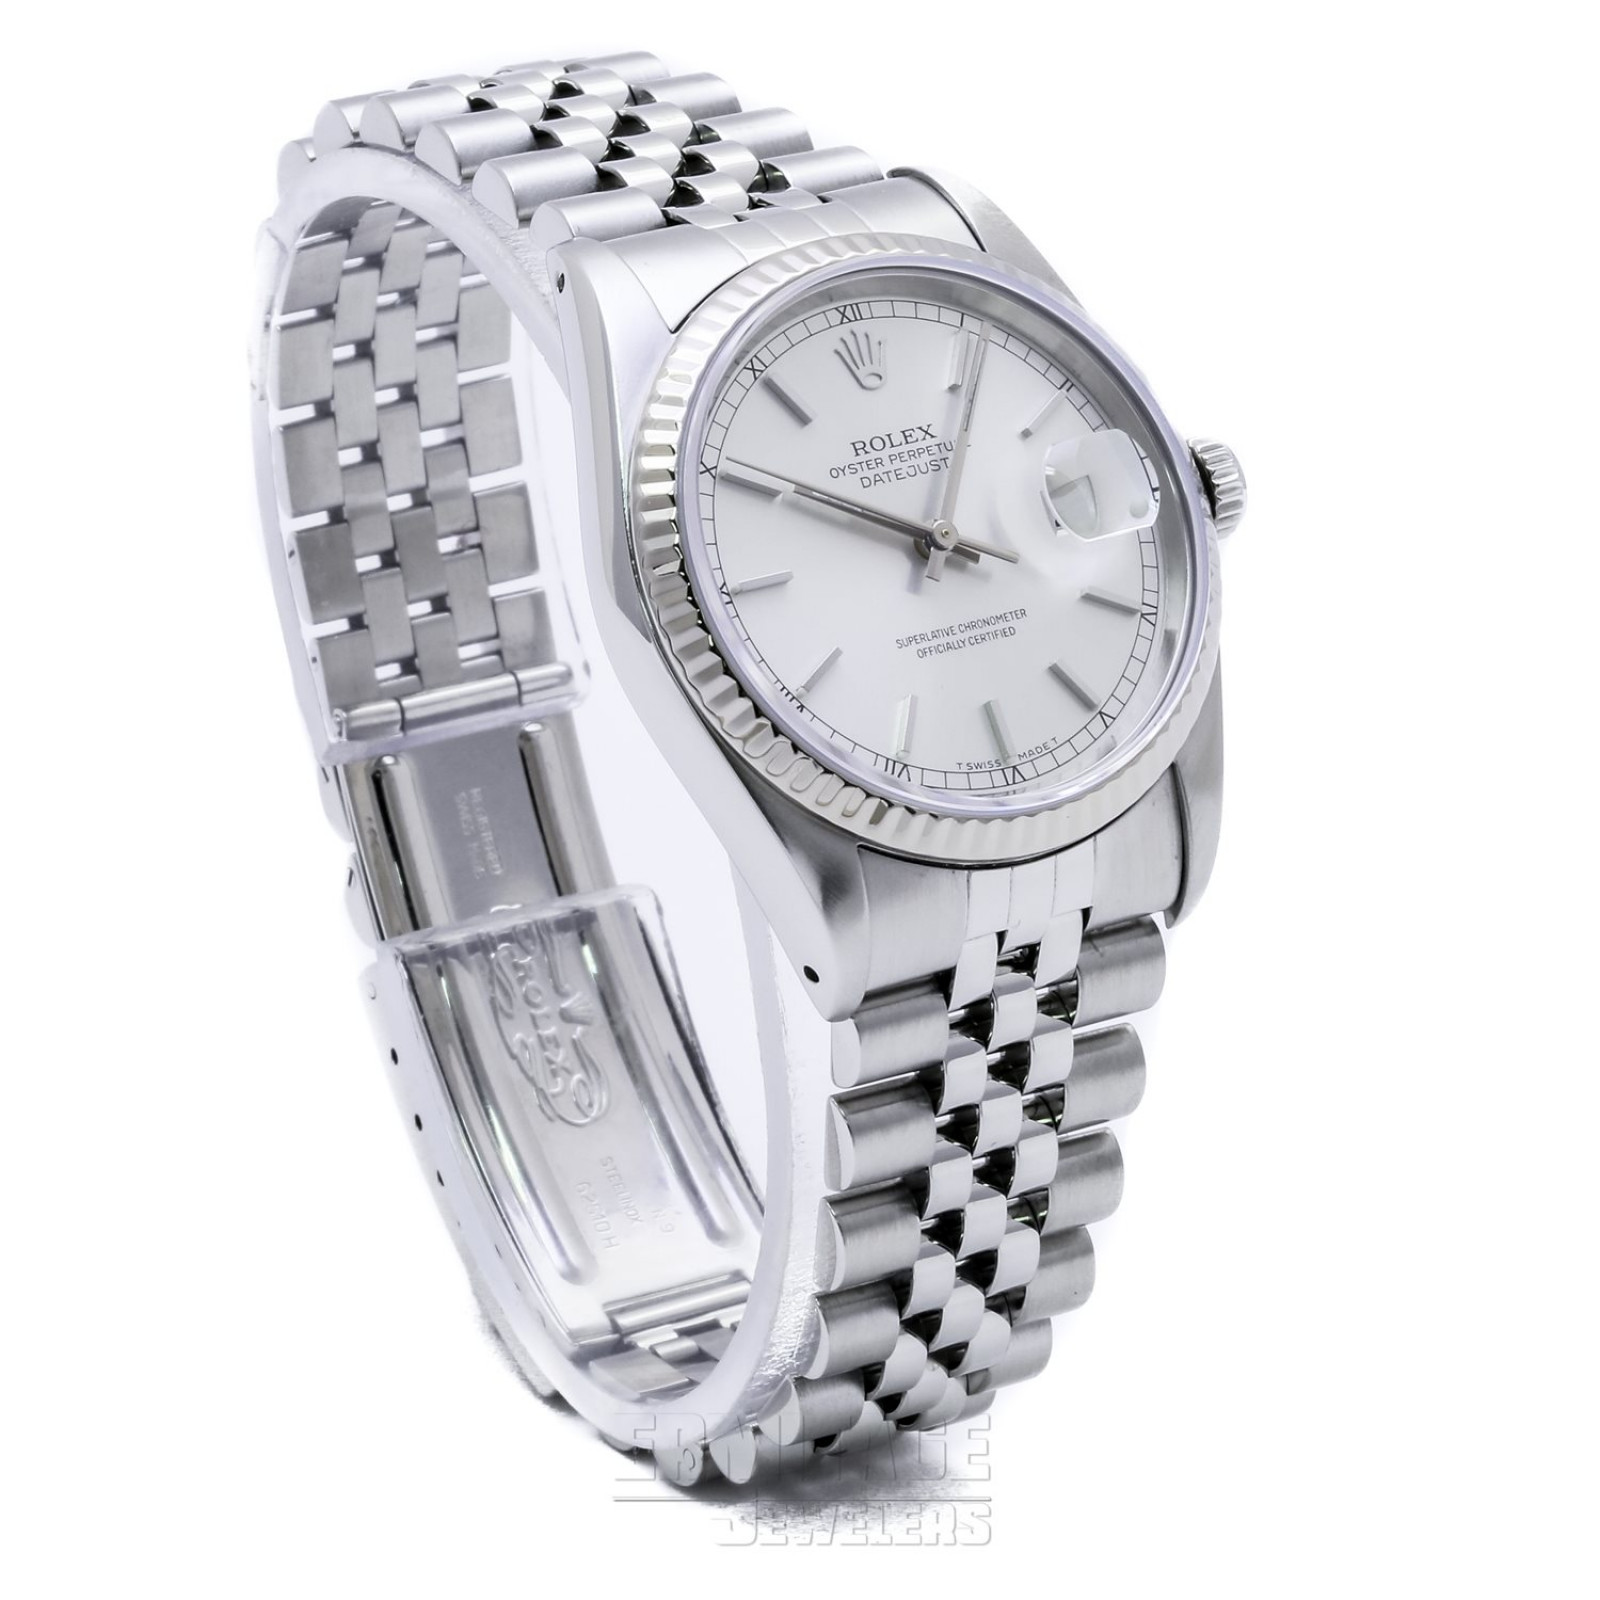 Rolex Datejust 16234 White Gold & Steel on Oyster